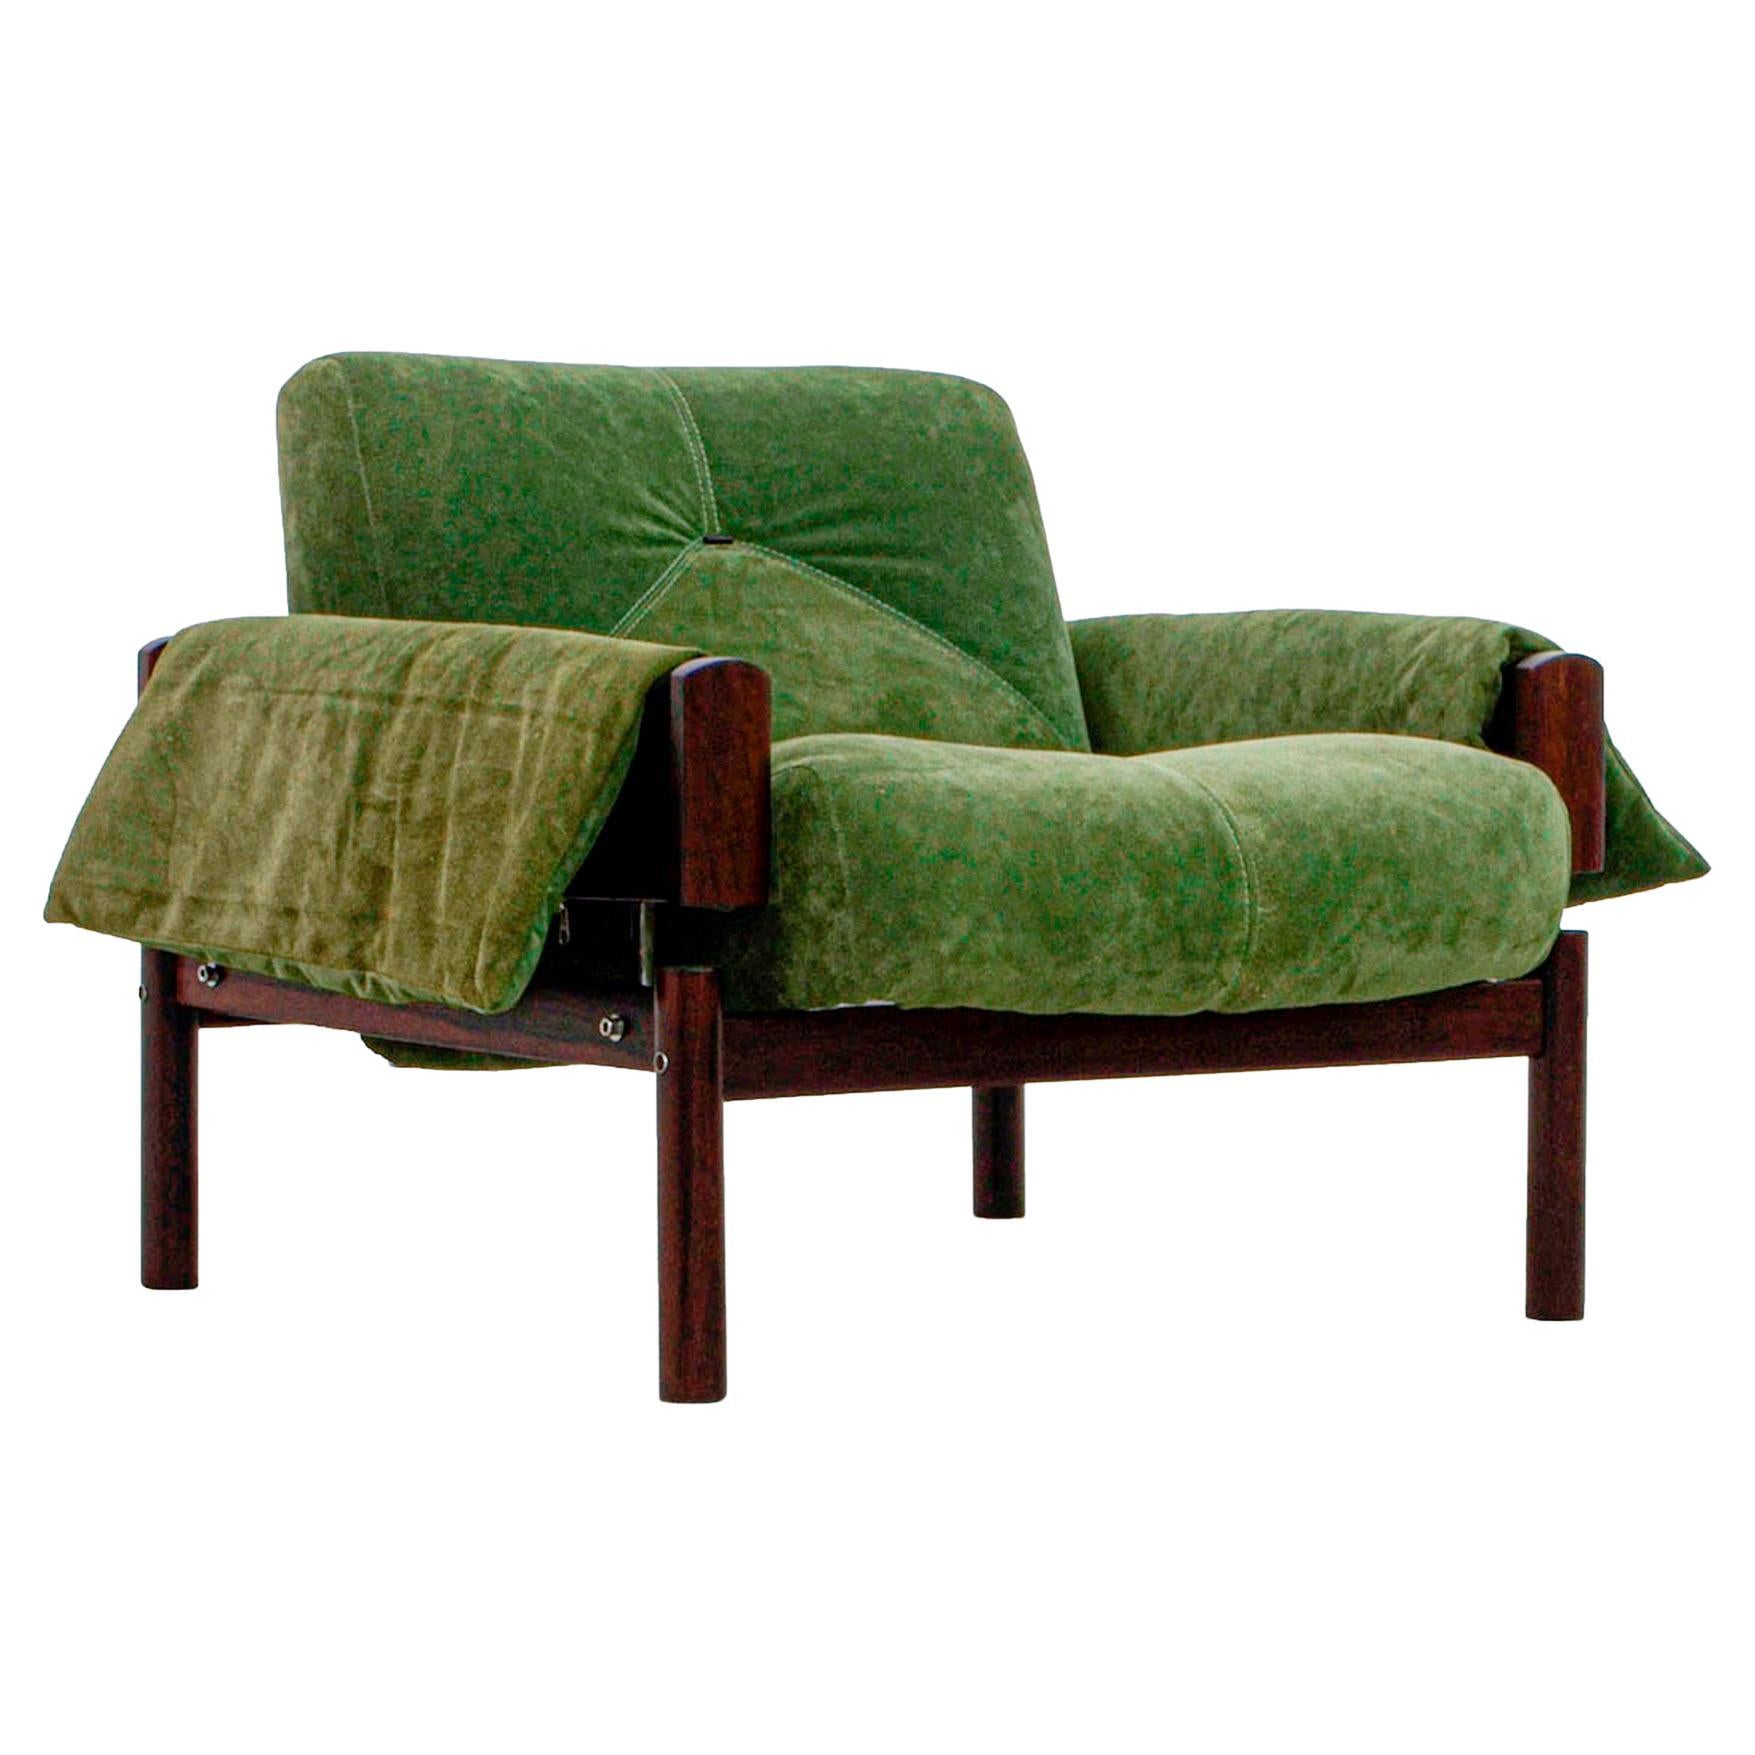 Pair of "MP-13" Armchairs, Percival Lafer, Brazilian Mid-Century Modern